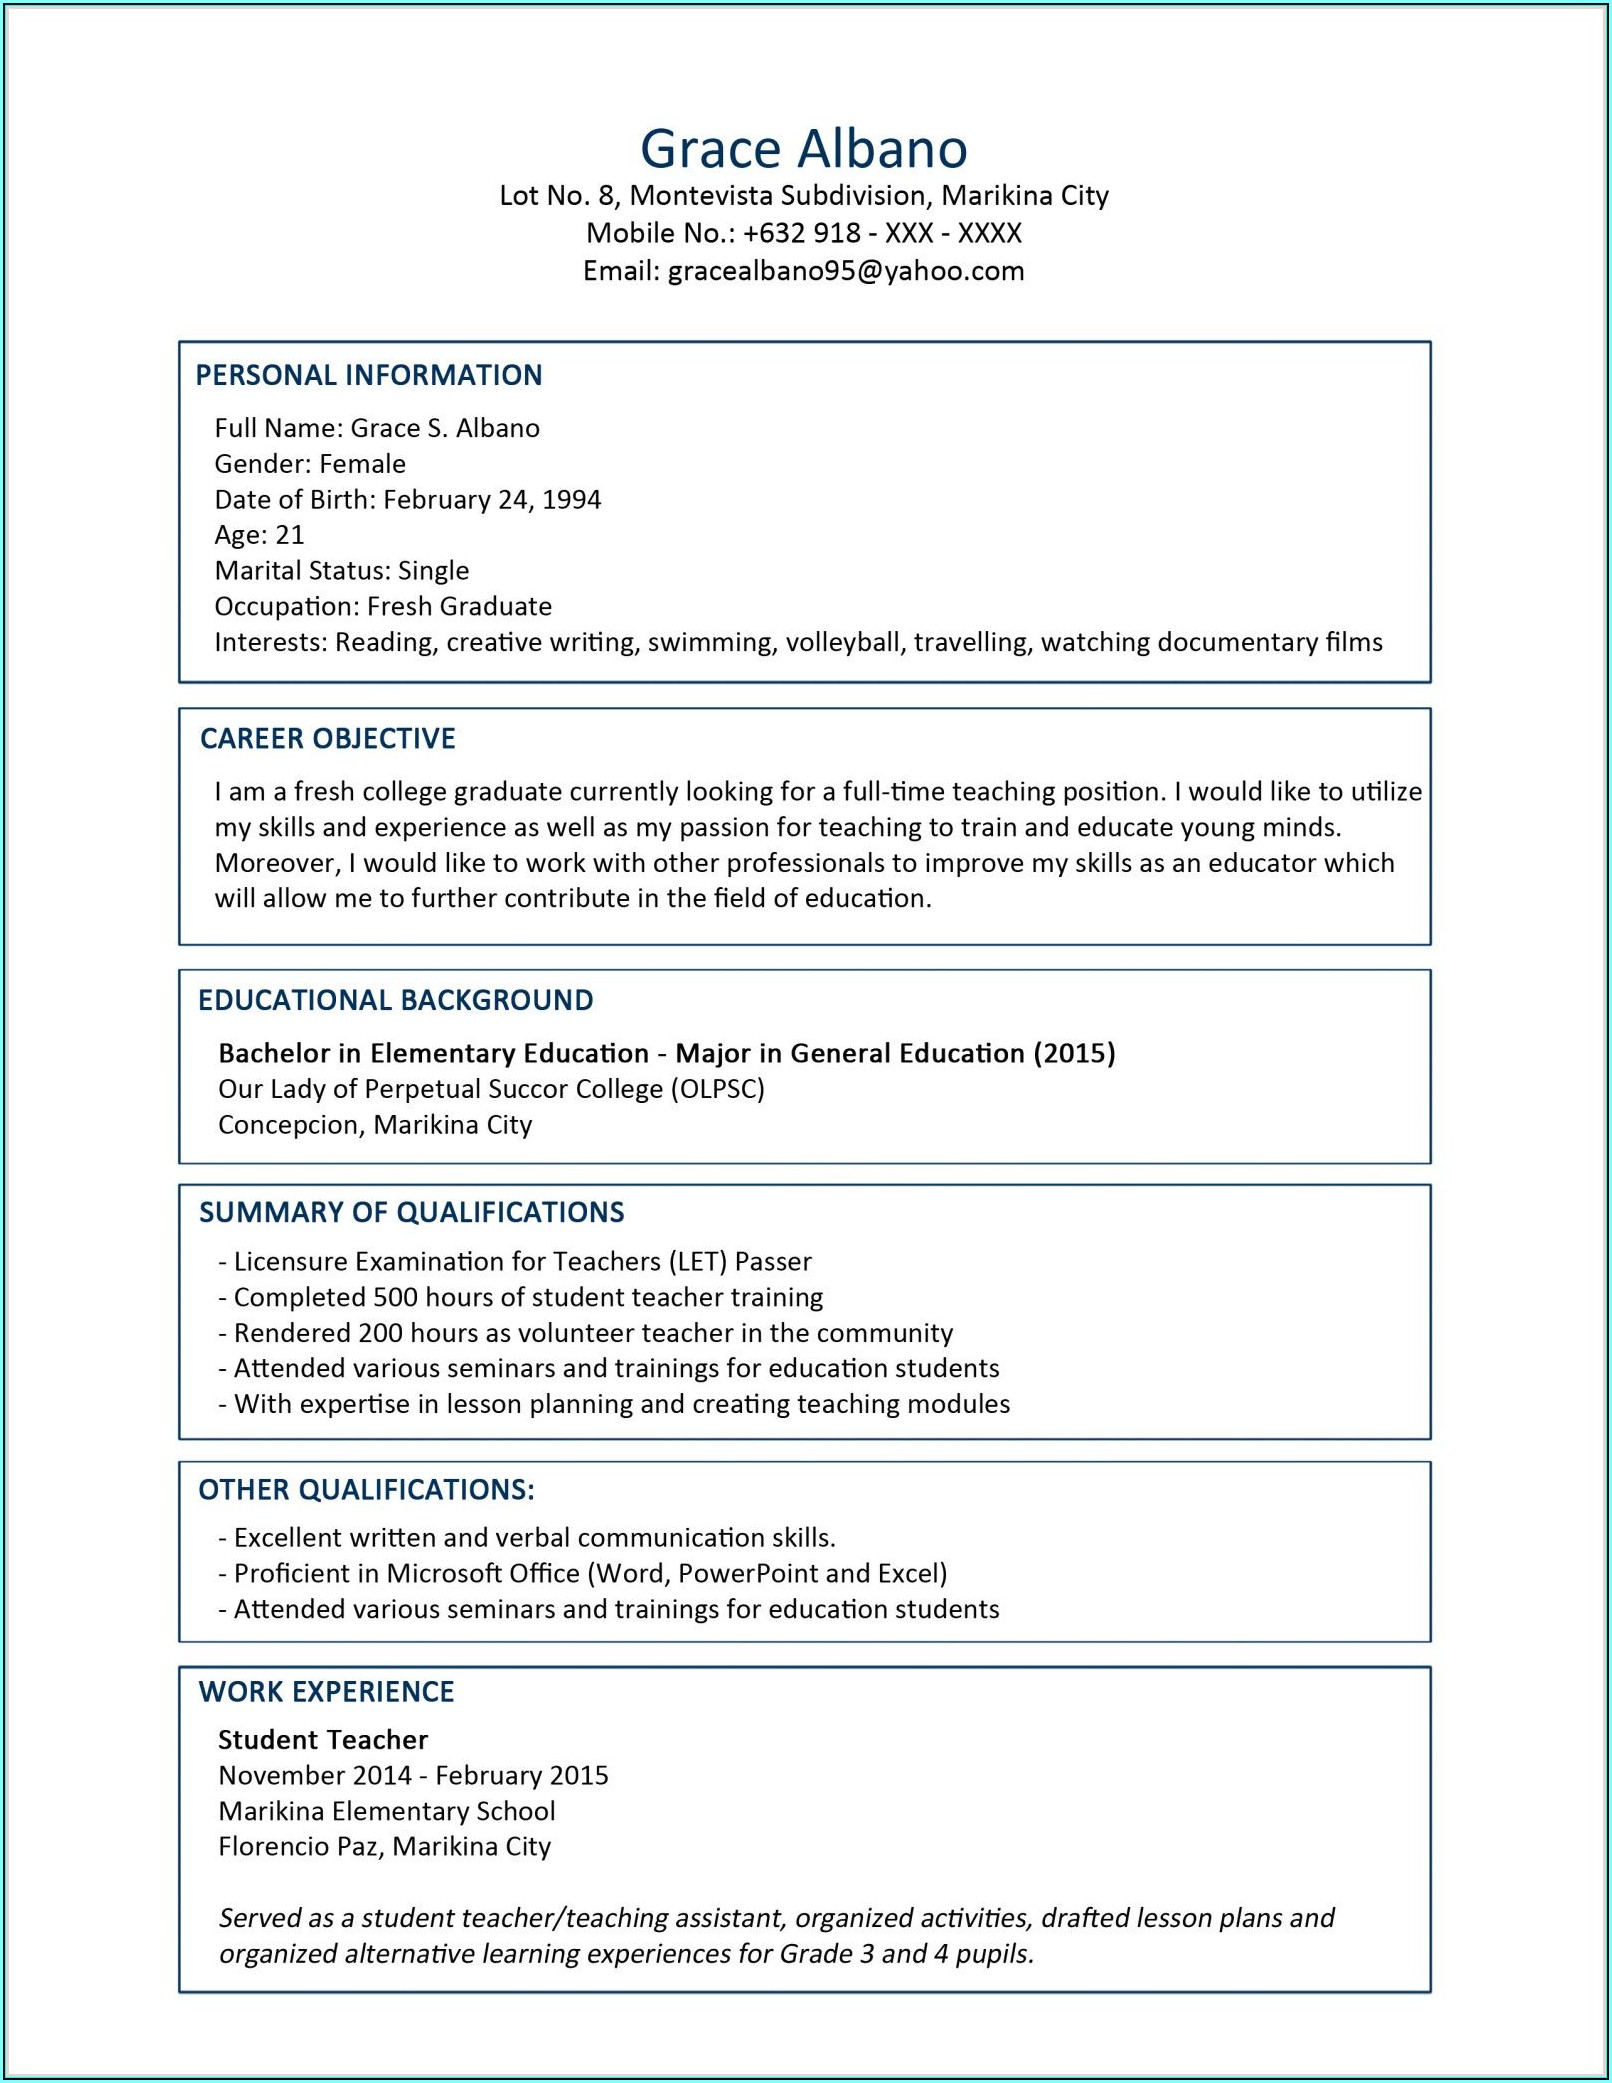 Resume Format Download In Ms Word For Accountant